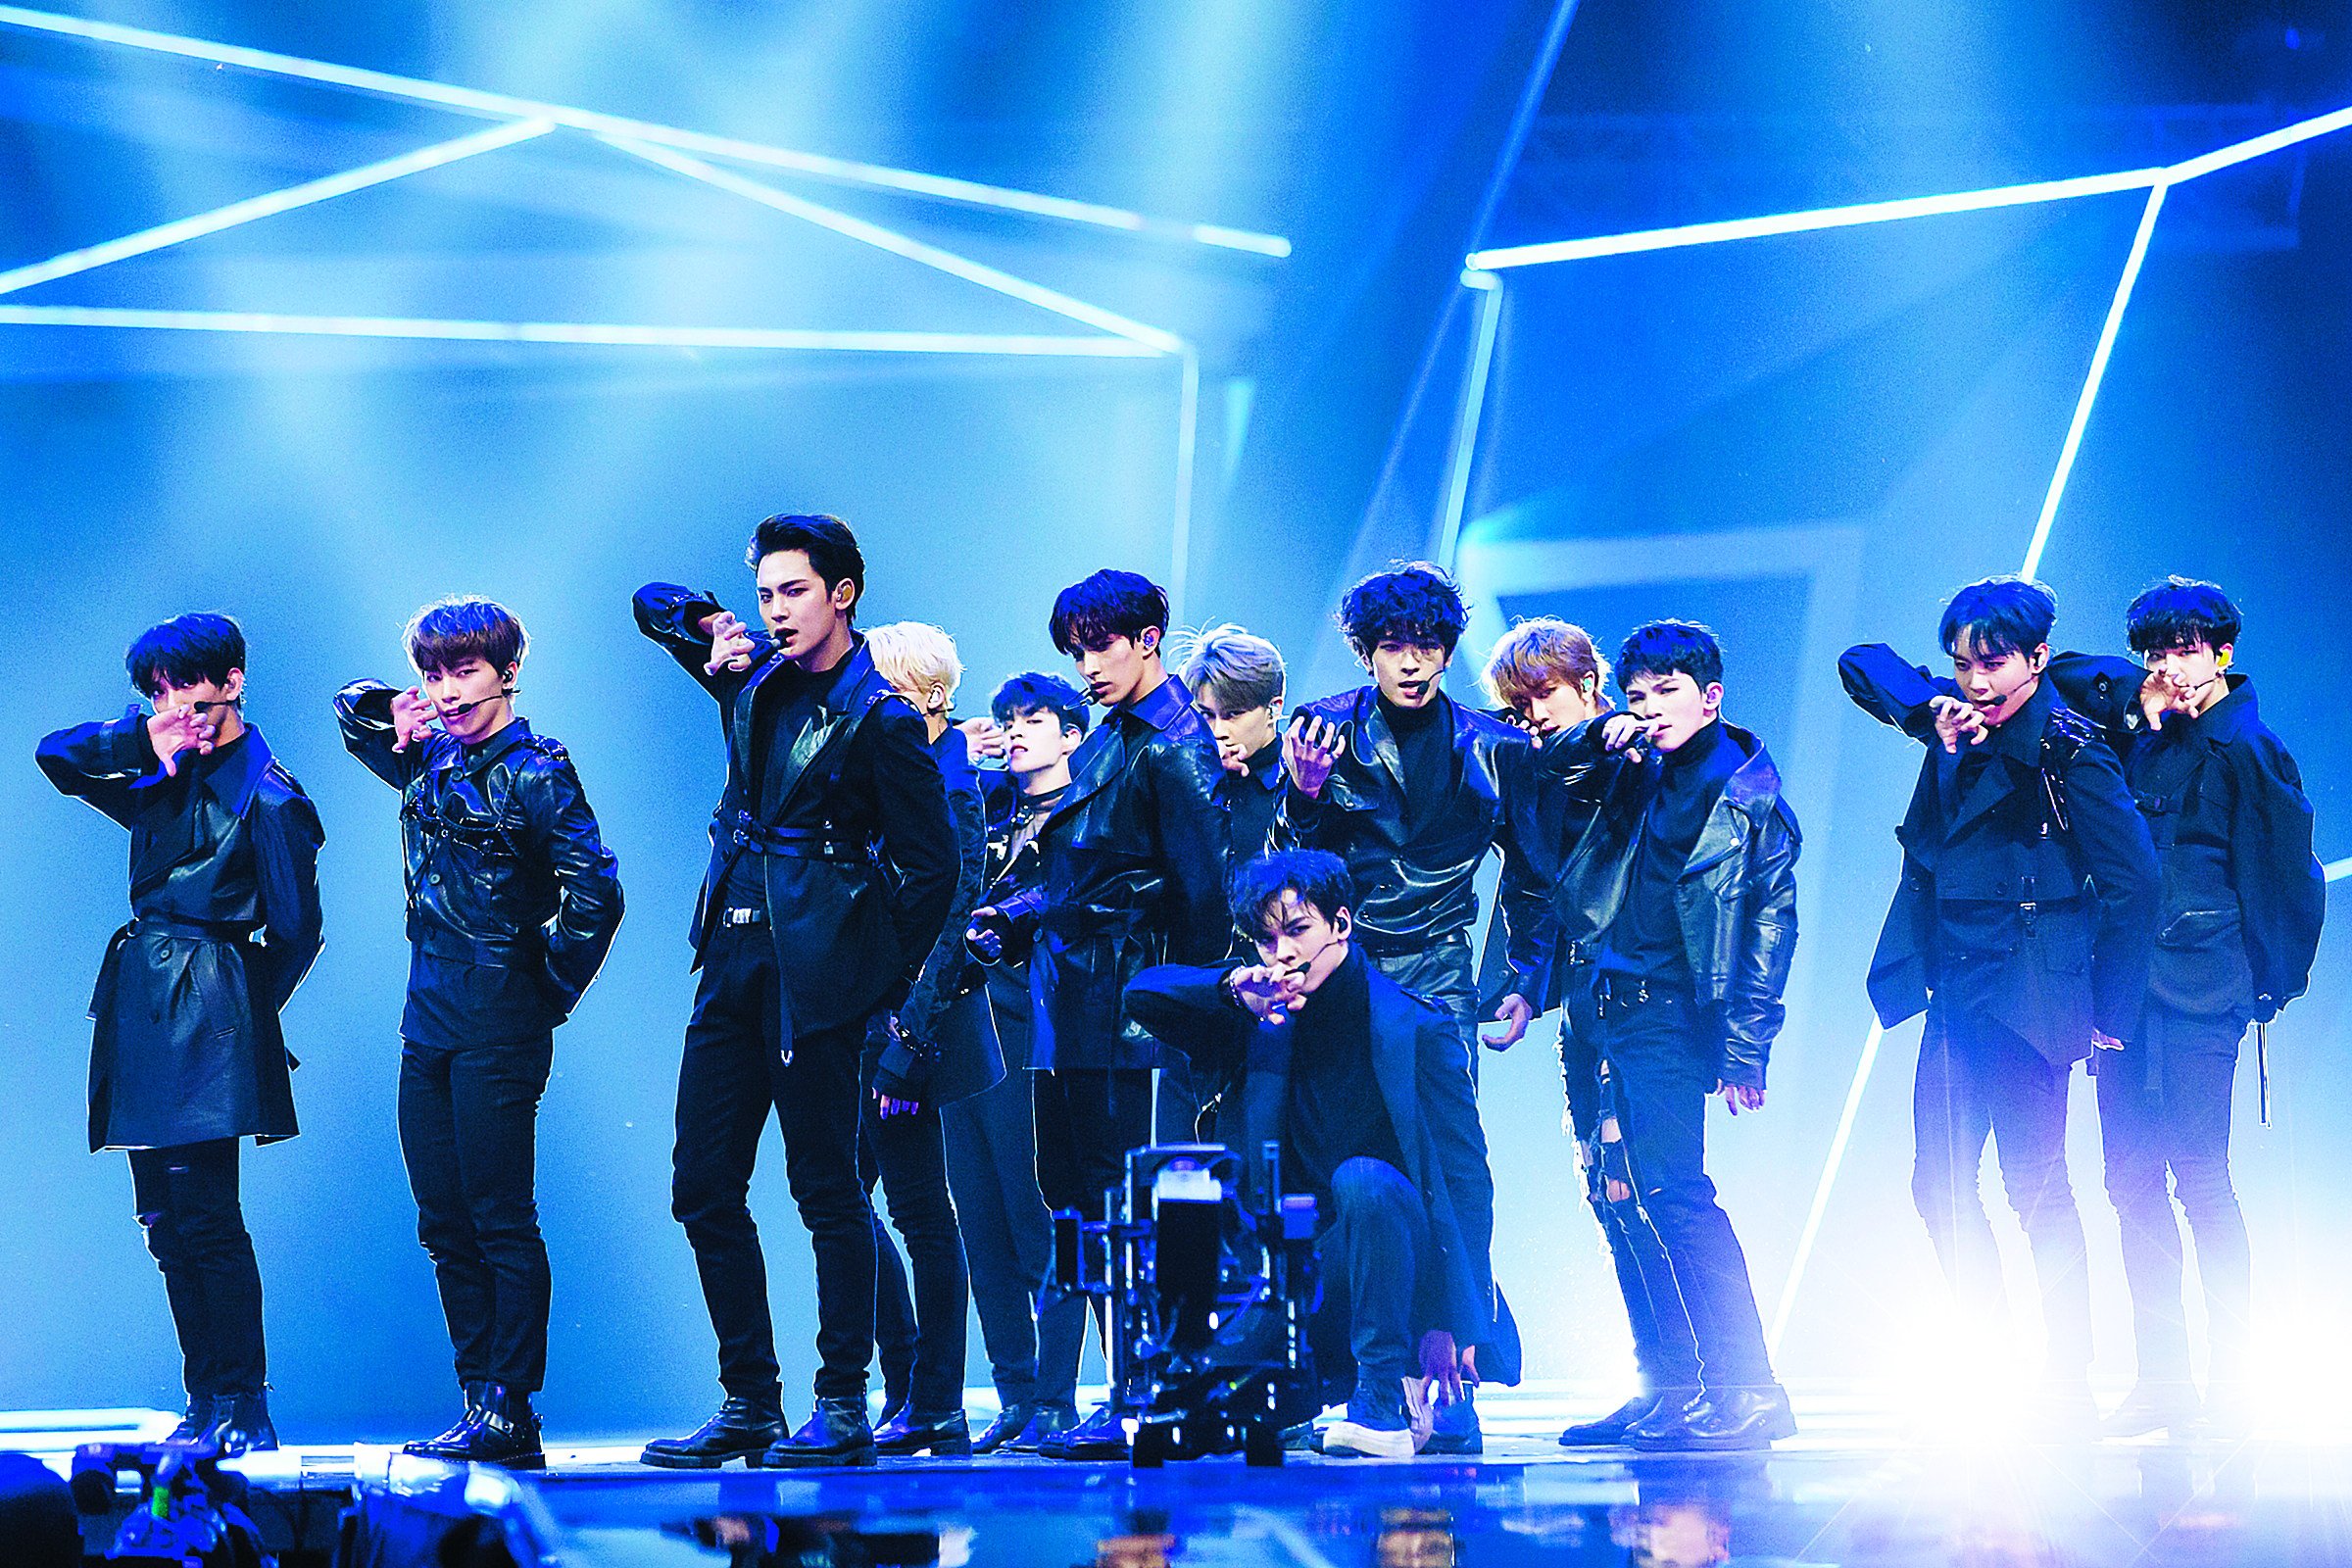 Members of K-pop group Seventeen perform at the Mnet Asian Music Awards (MAMA) show in Hong Kong in 2018. The show has been rebranded the MAMA Awards and 2022’s ceremony will be held in Osaka, Japan. Photo: Mama